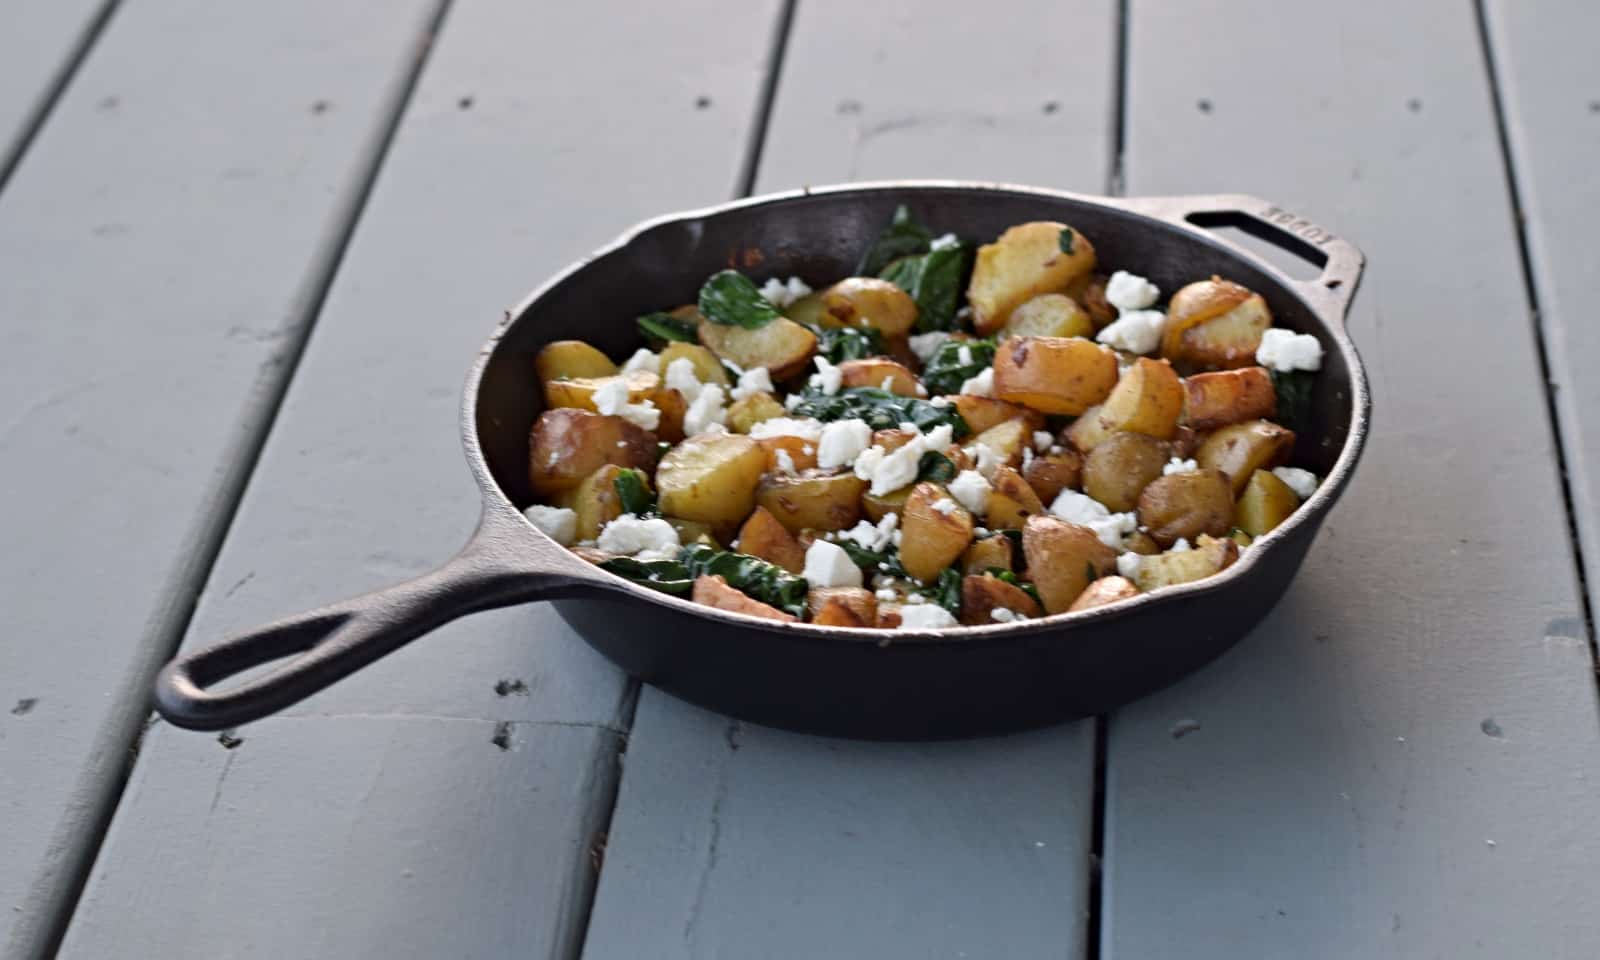 This photo shows a cast iron skillet with oven roasted potatoes with spinach and garlic on a blue wooden background.